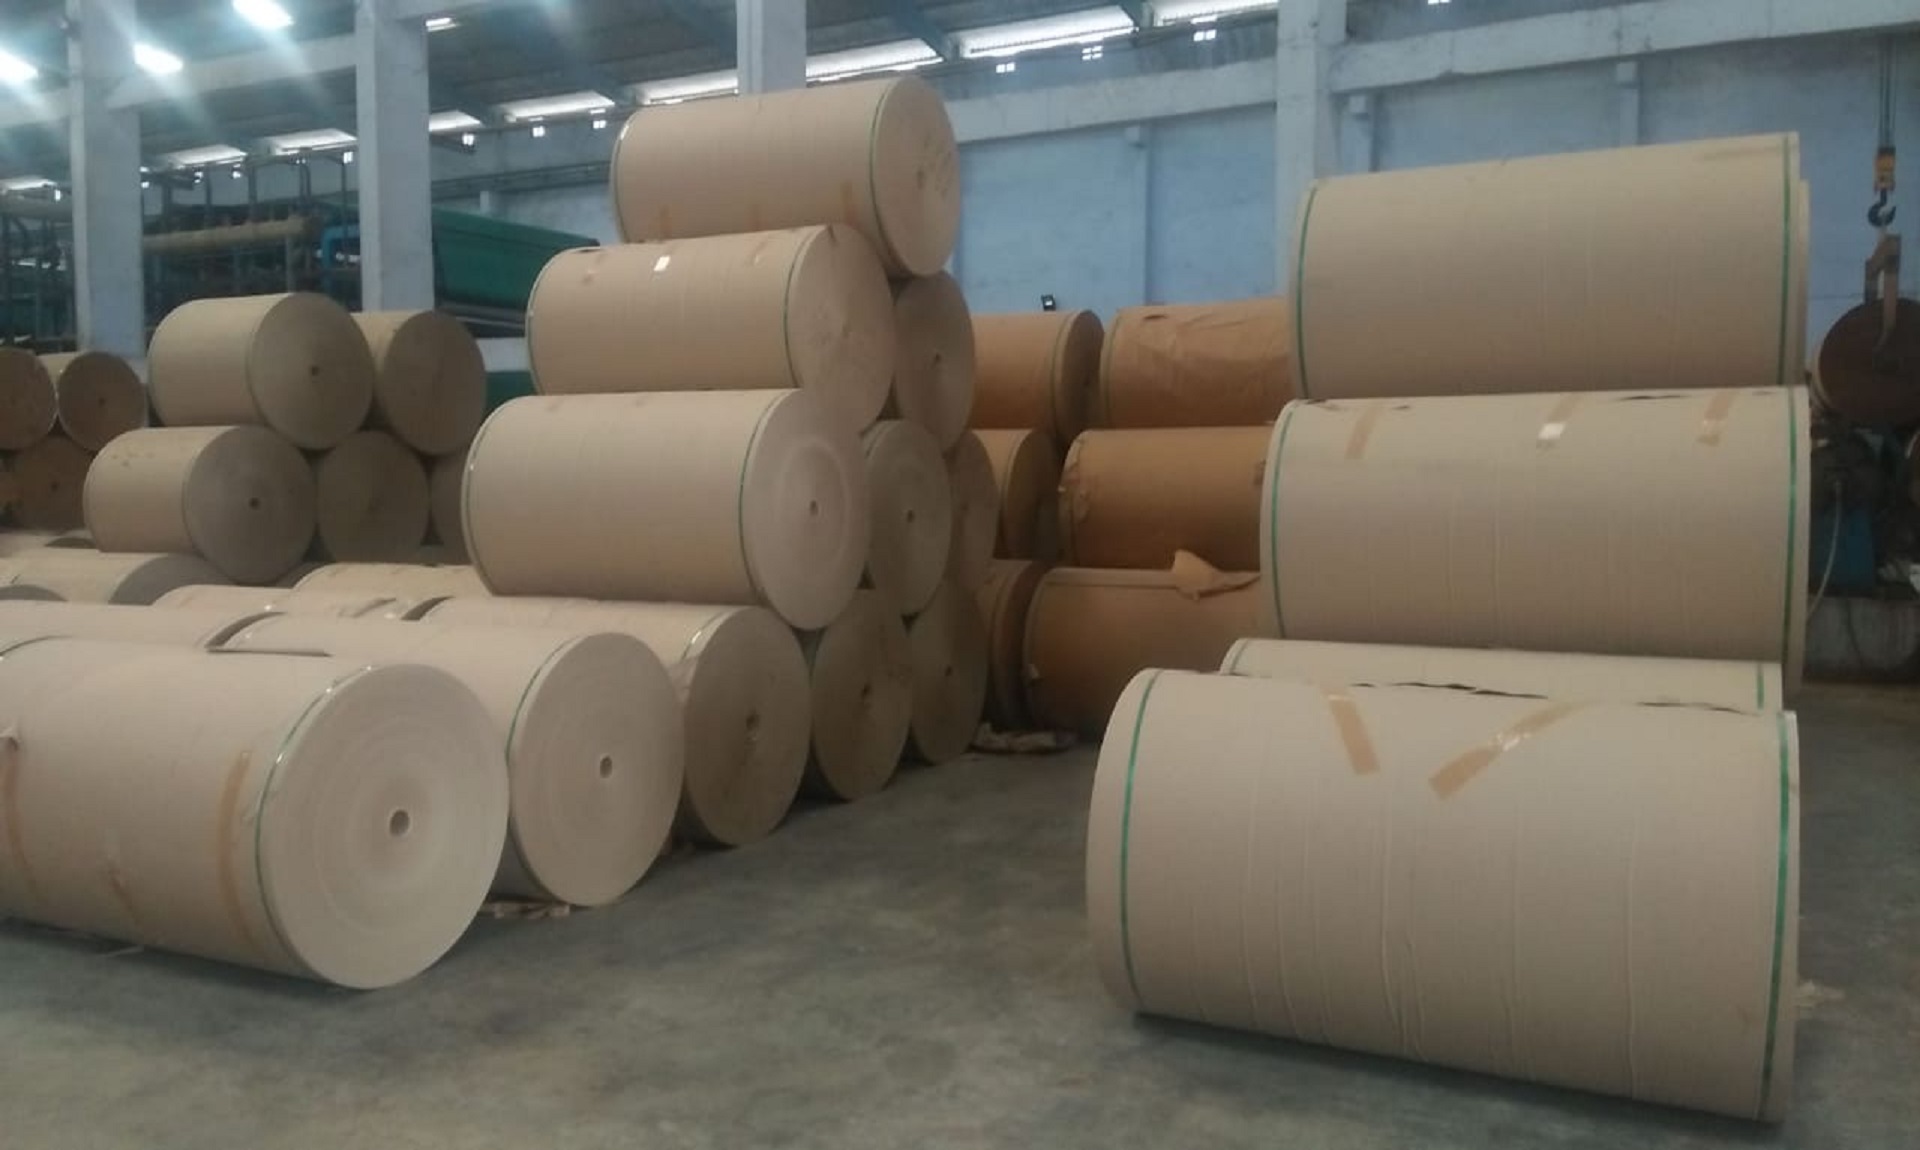 paper packaging and packaging solutions, paper import, paper export, packaging import, packaging export, paper, paper packaging, packaging, packaging solutions